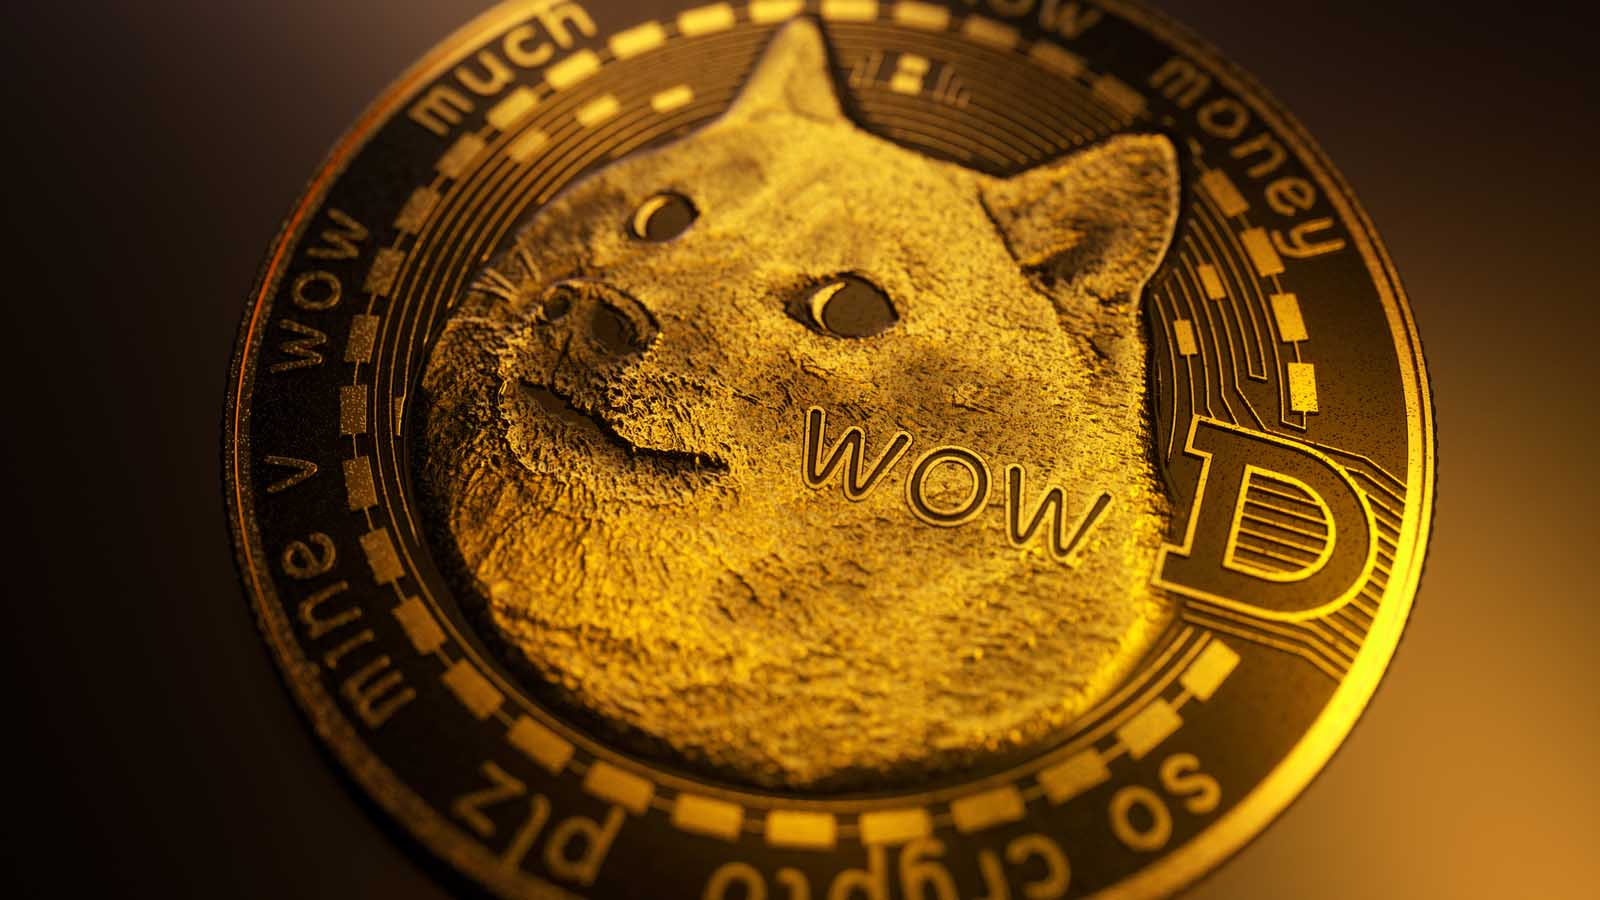 A picture of Dogecoin, the popular meme-inspired cryptocurrency.